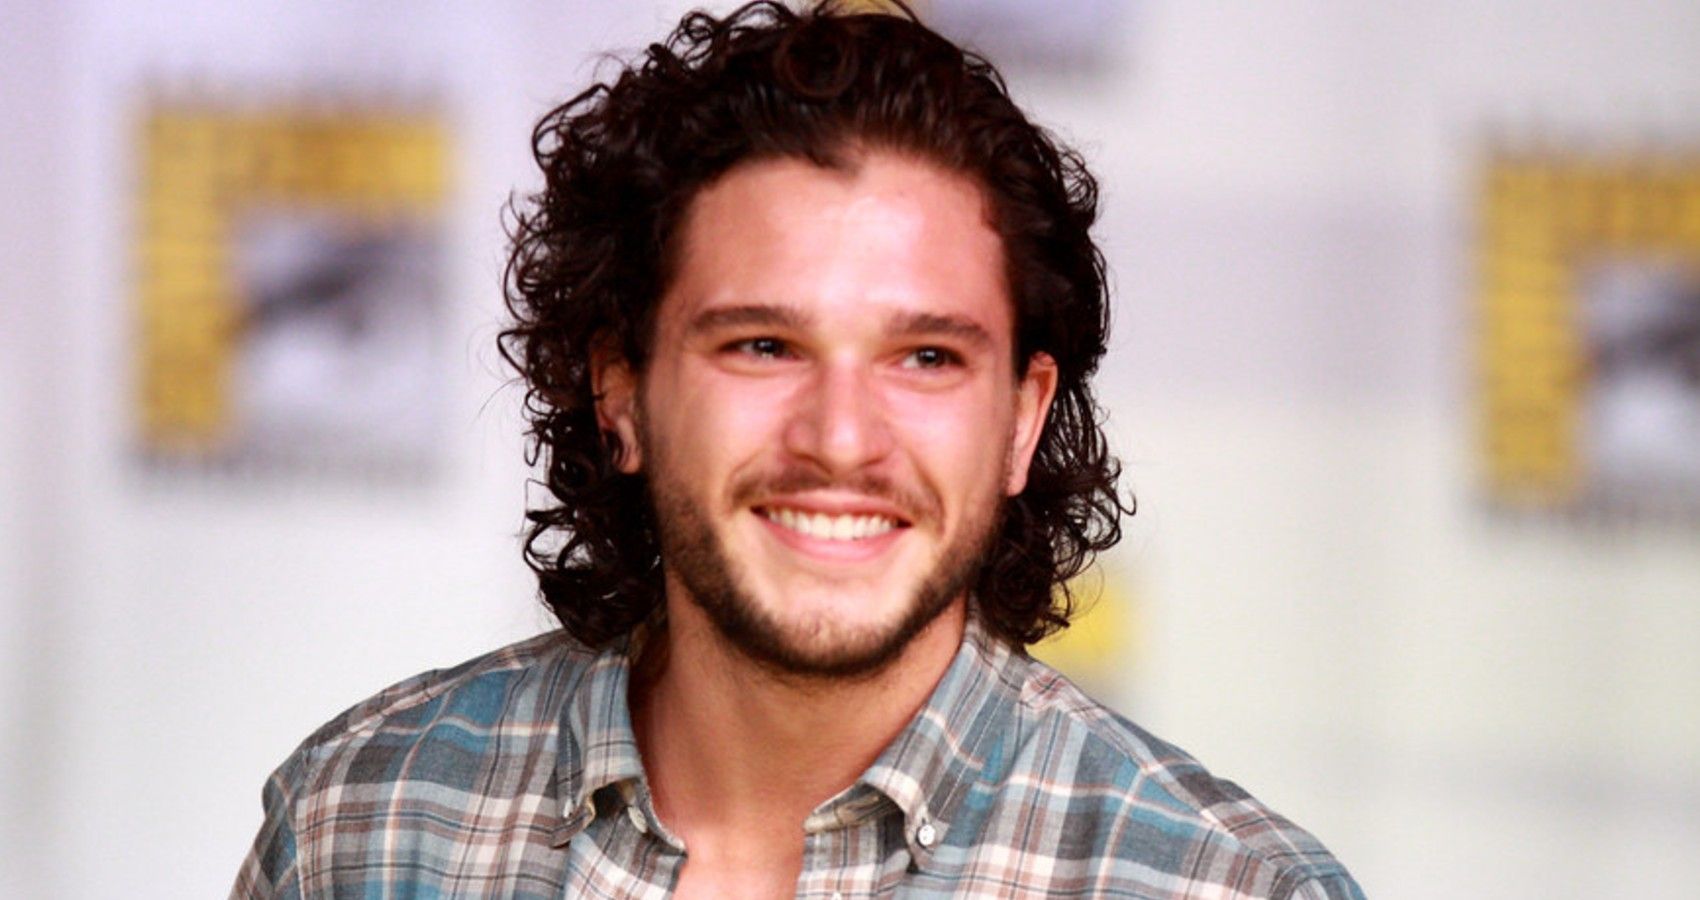 Kit Harrington at a convention for the game of thrones rv show